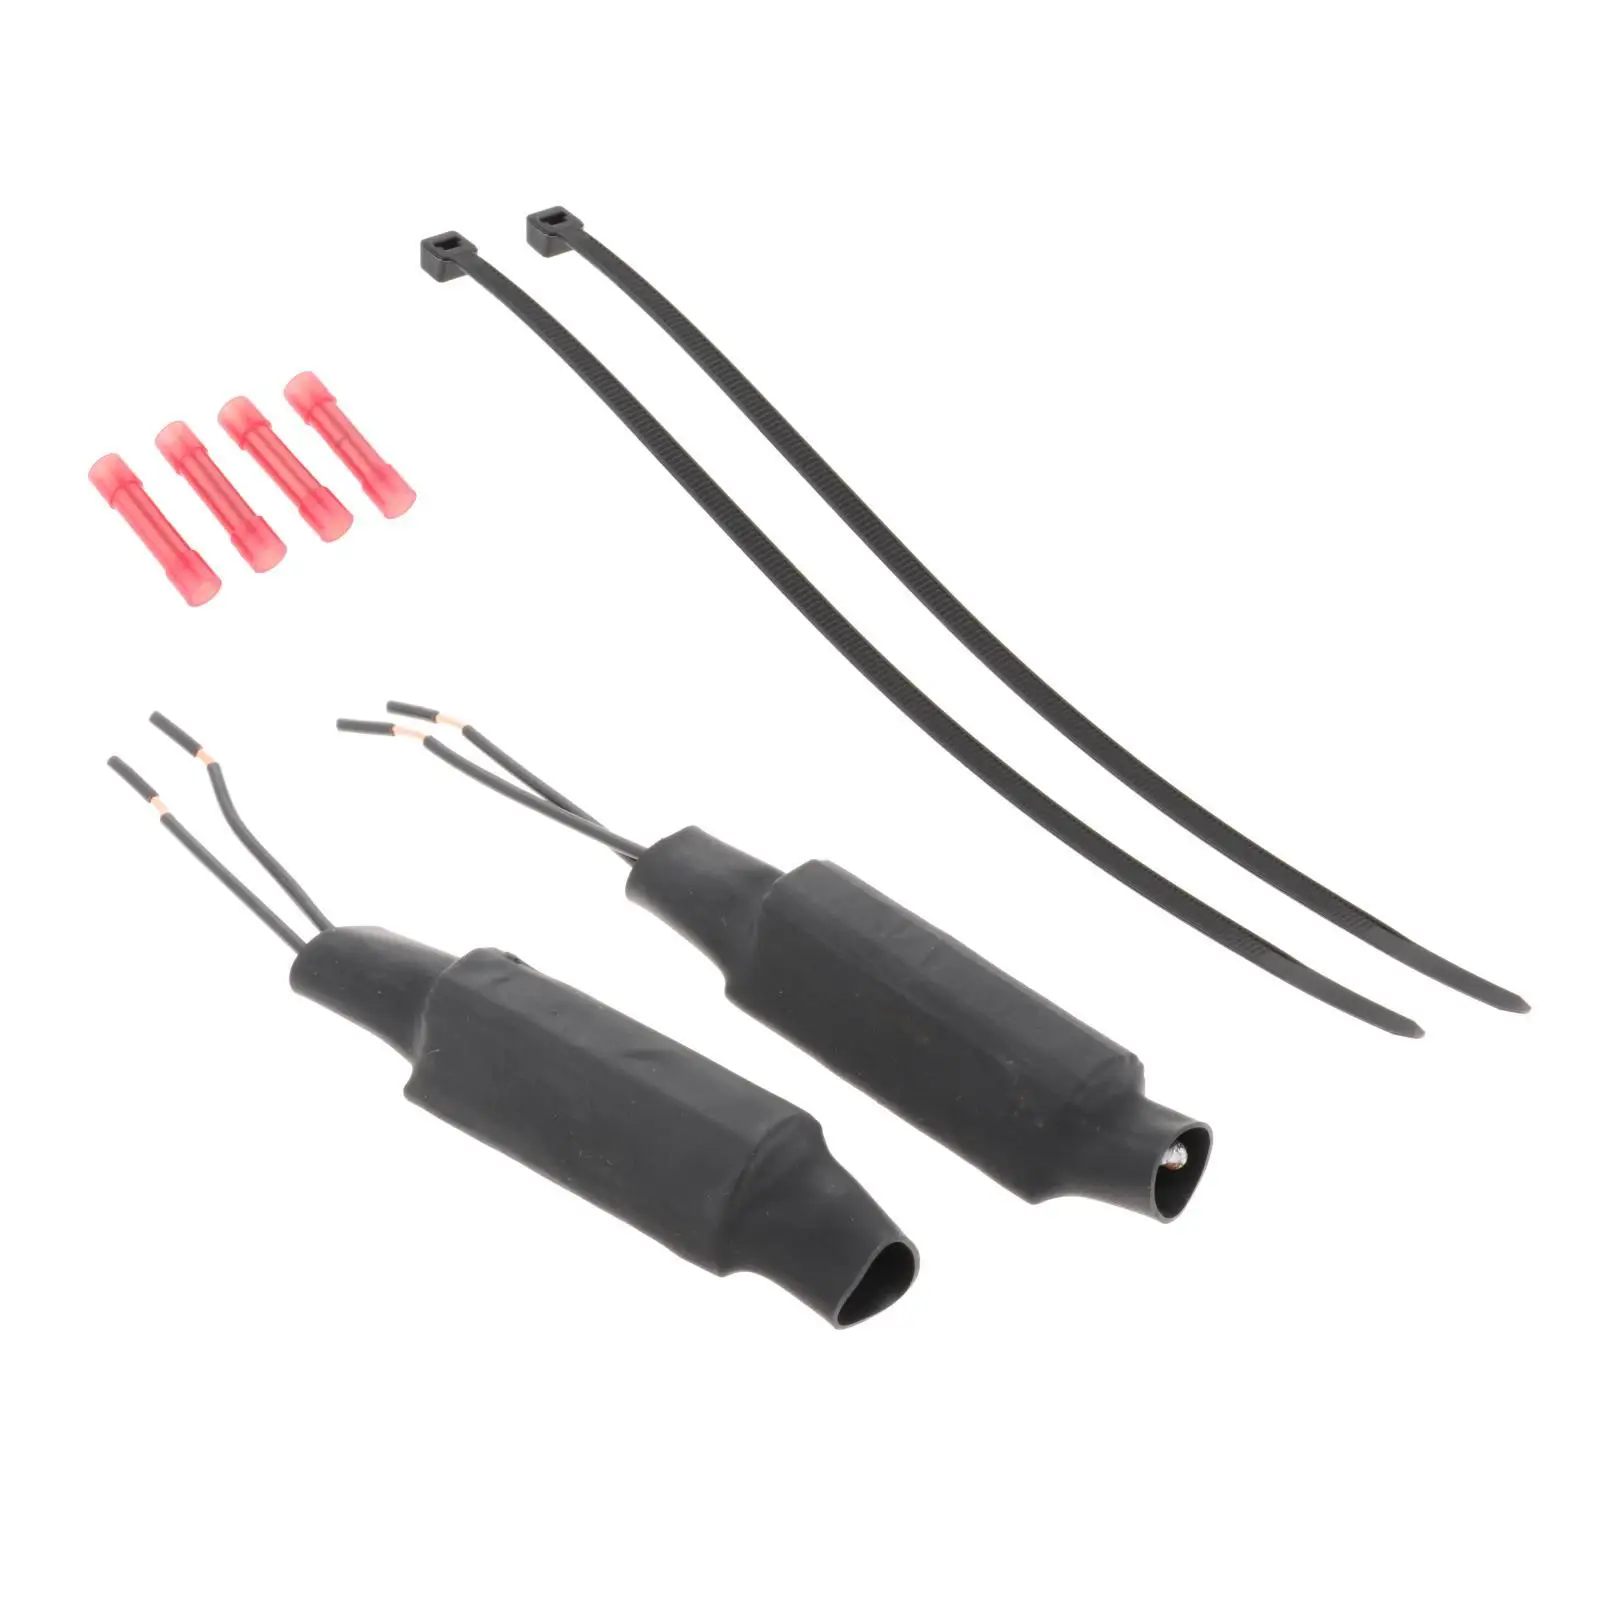 Car Strut  Premium Quality Car Supplies Vehicle Parts Easy to Use Struts Mount Kit Replacement 55 / 2013-2019